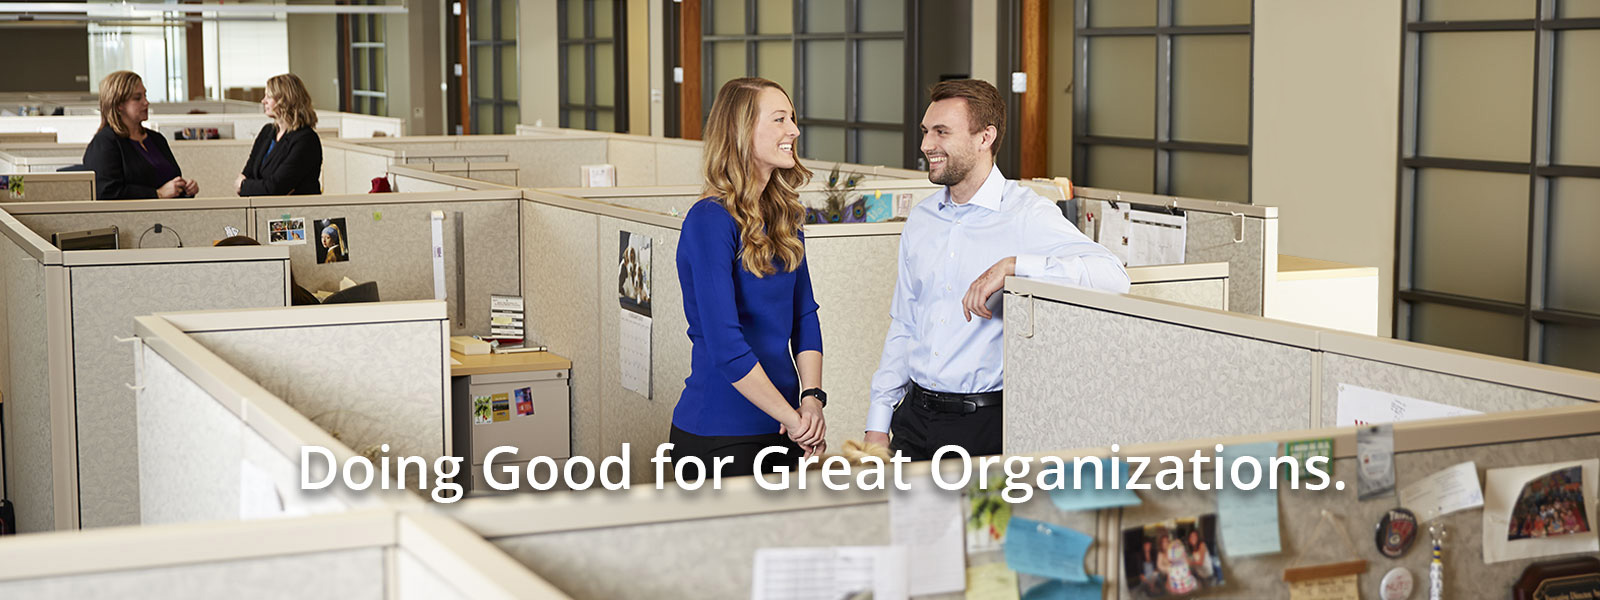 Doing Good for Great Organizations.